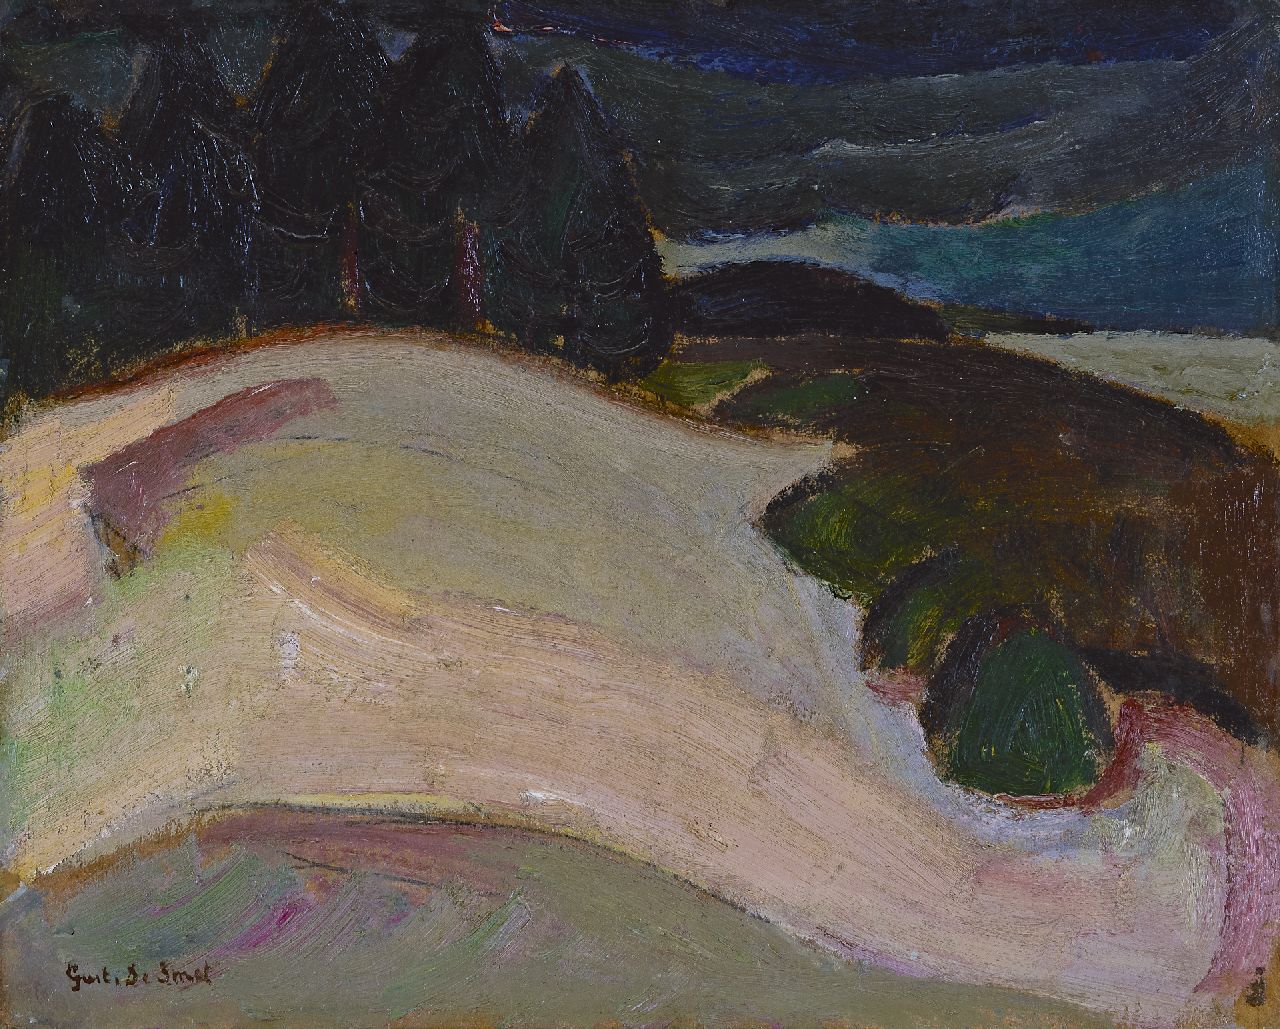 Smet G. de | Gustave de Smet, Landscape, oil on board laid down on panel 31.9 x 38.6 cm, signed l.l. and painted ca. 1917